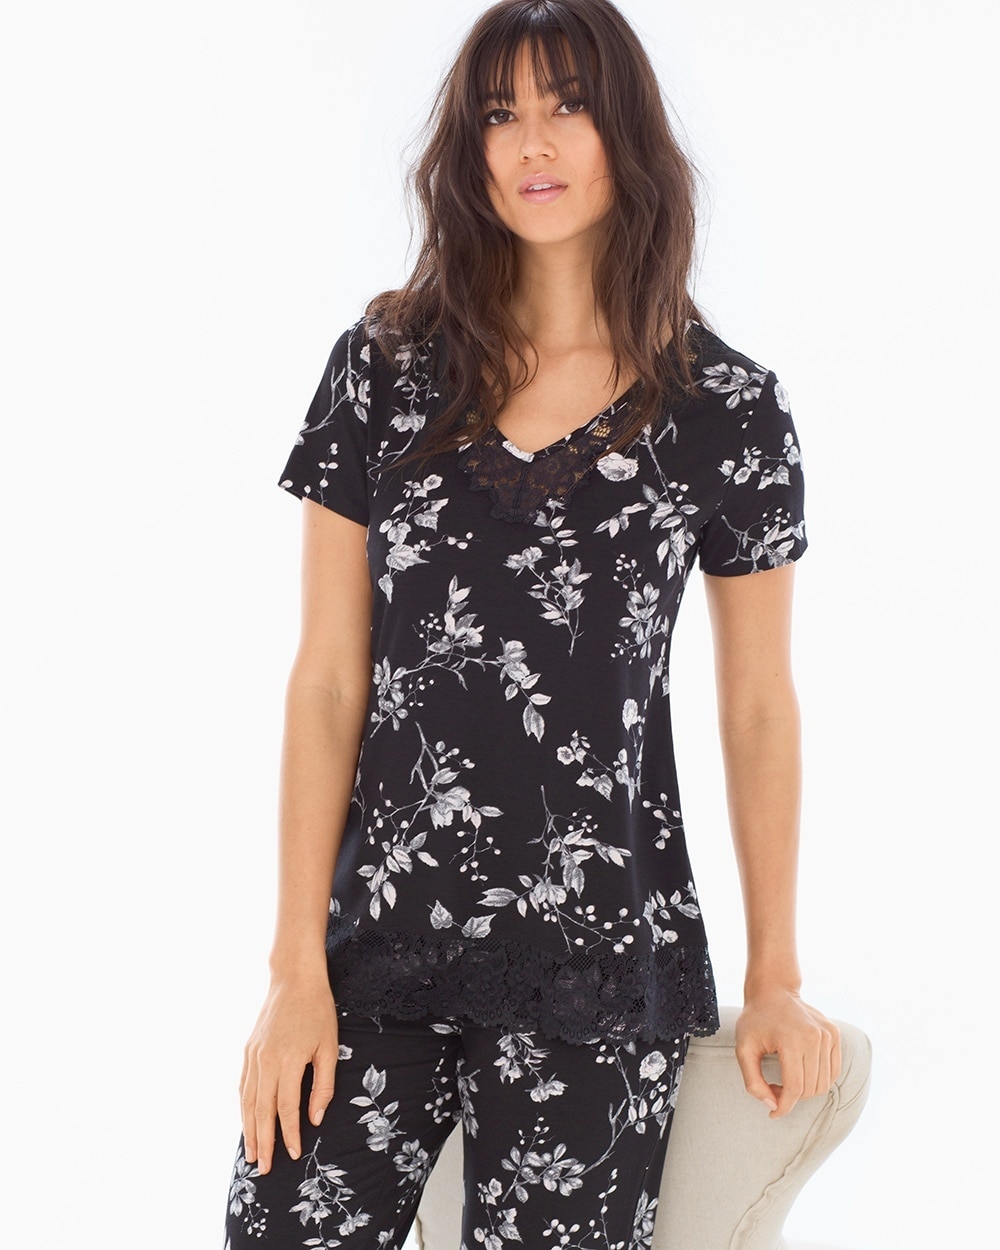 Cool Nights Lace Trim Short Sleeve Pajama Top Floral Faire Black